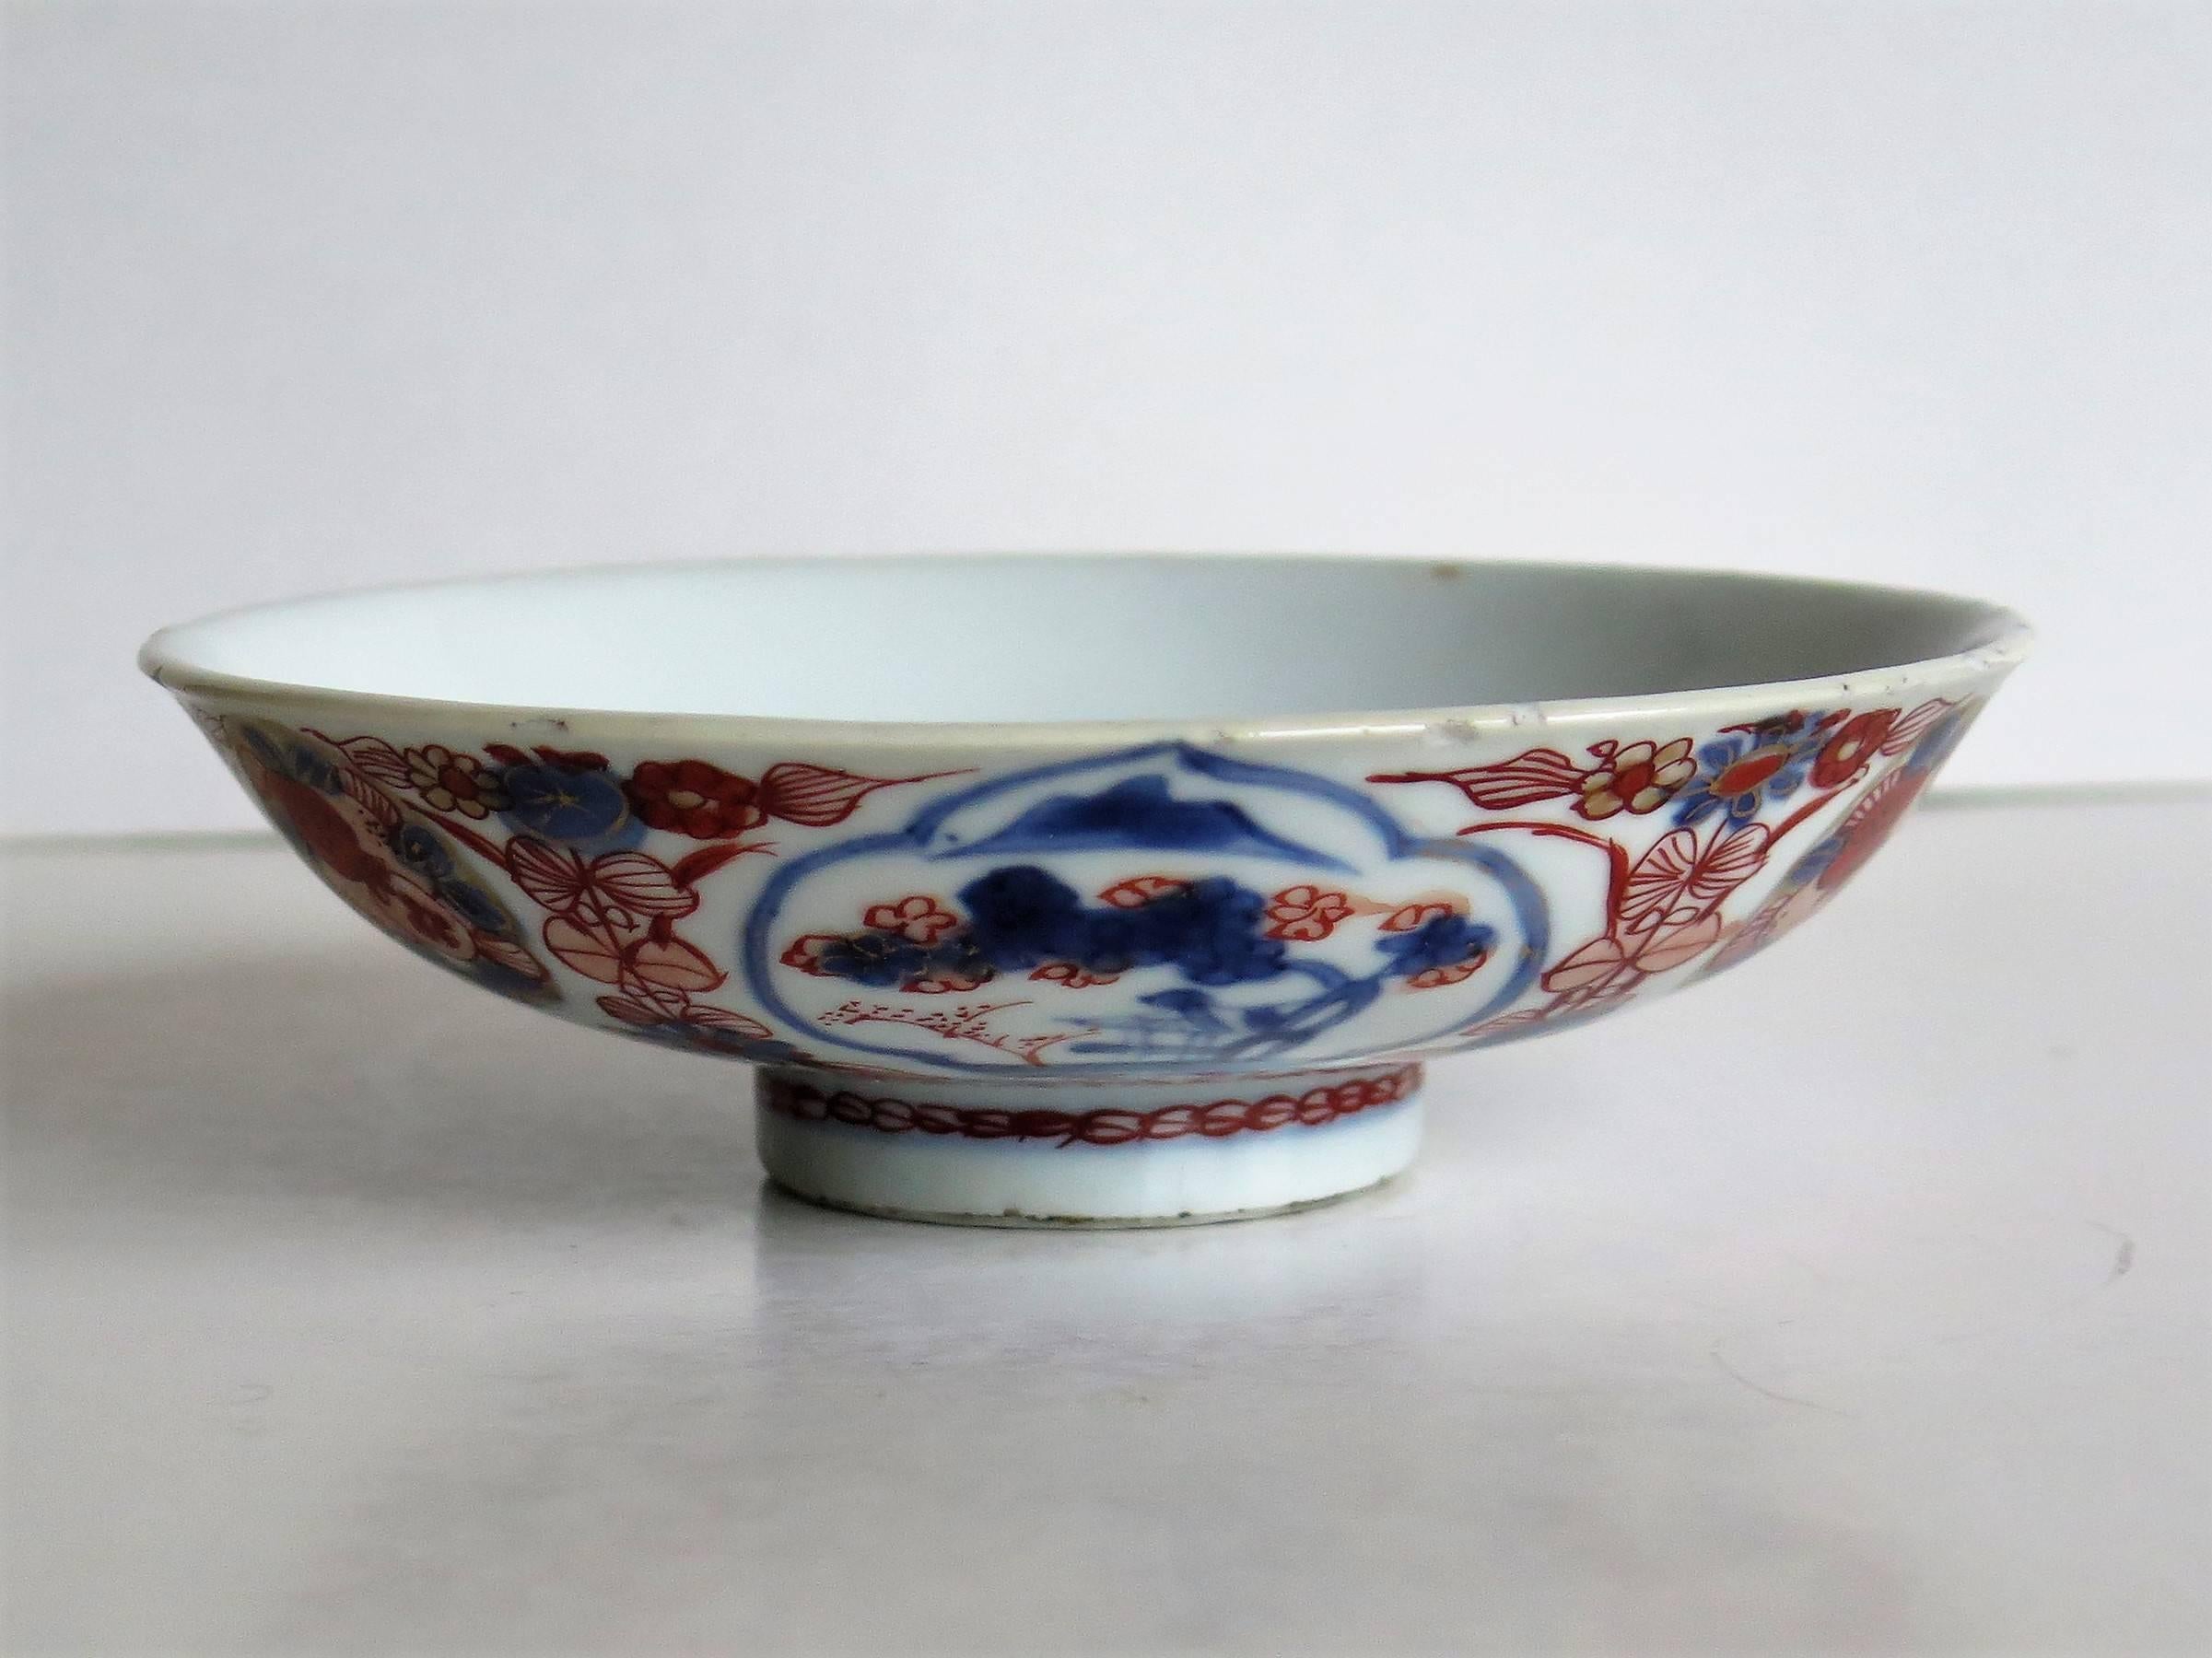 This is a beautiful Chinese porcelain footed bowl that we date to the Qing, Kangxi period, circa 1700.

This bowl is fairly shallow with an everted rim and sits on a tall foot, very similar to the tall feet on bowls of the earlier Ming Period. The